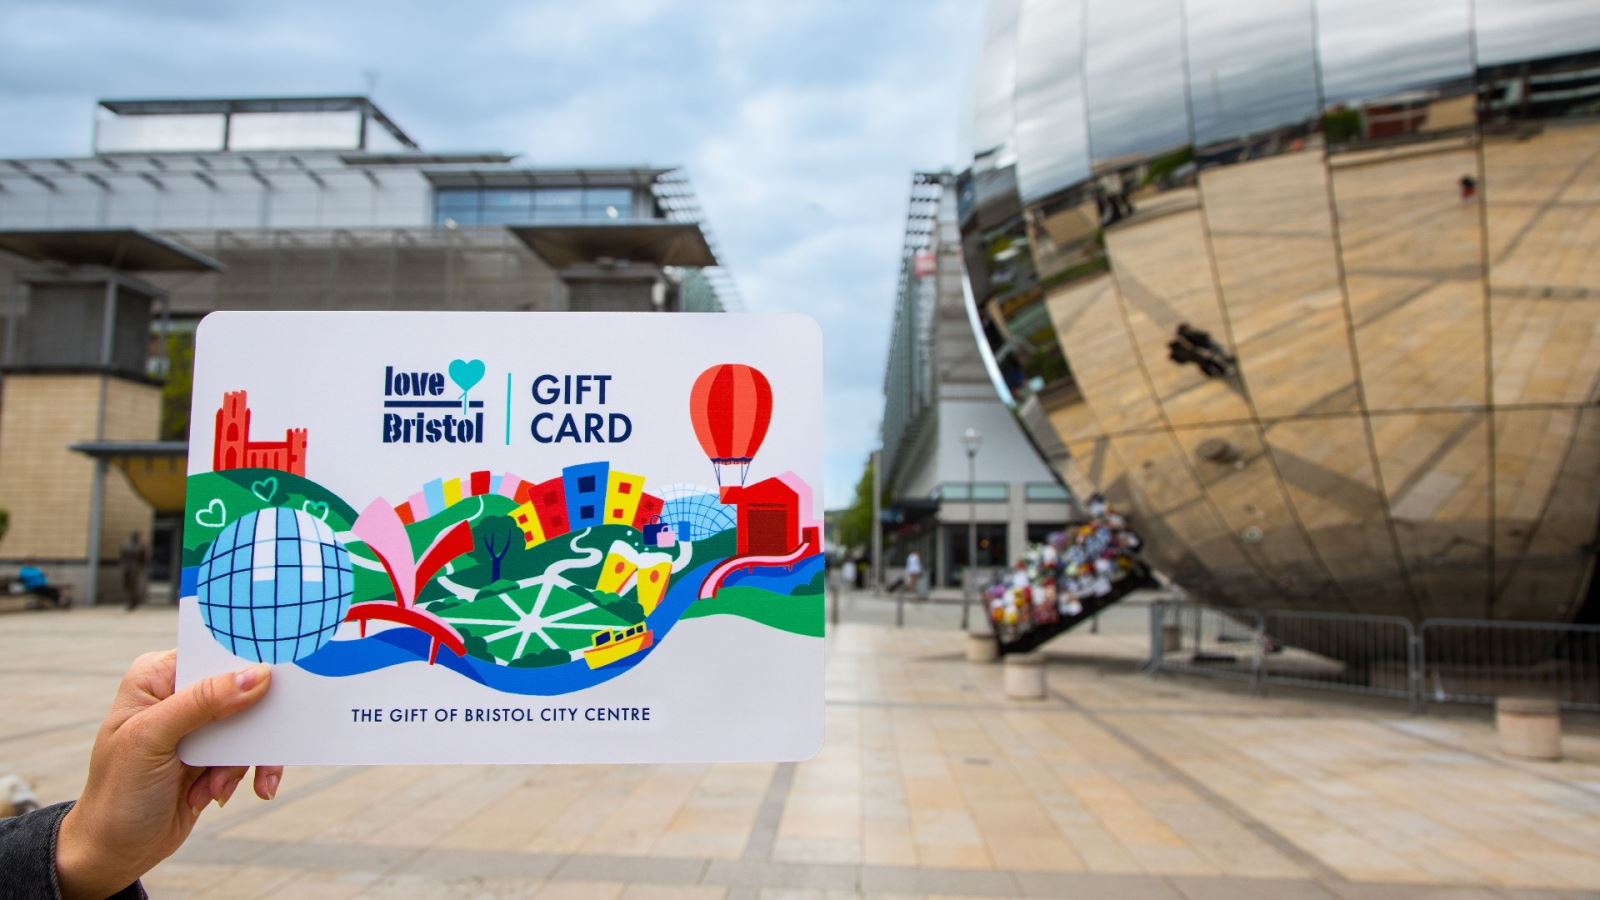 A giant gift card